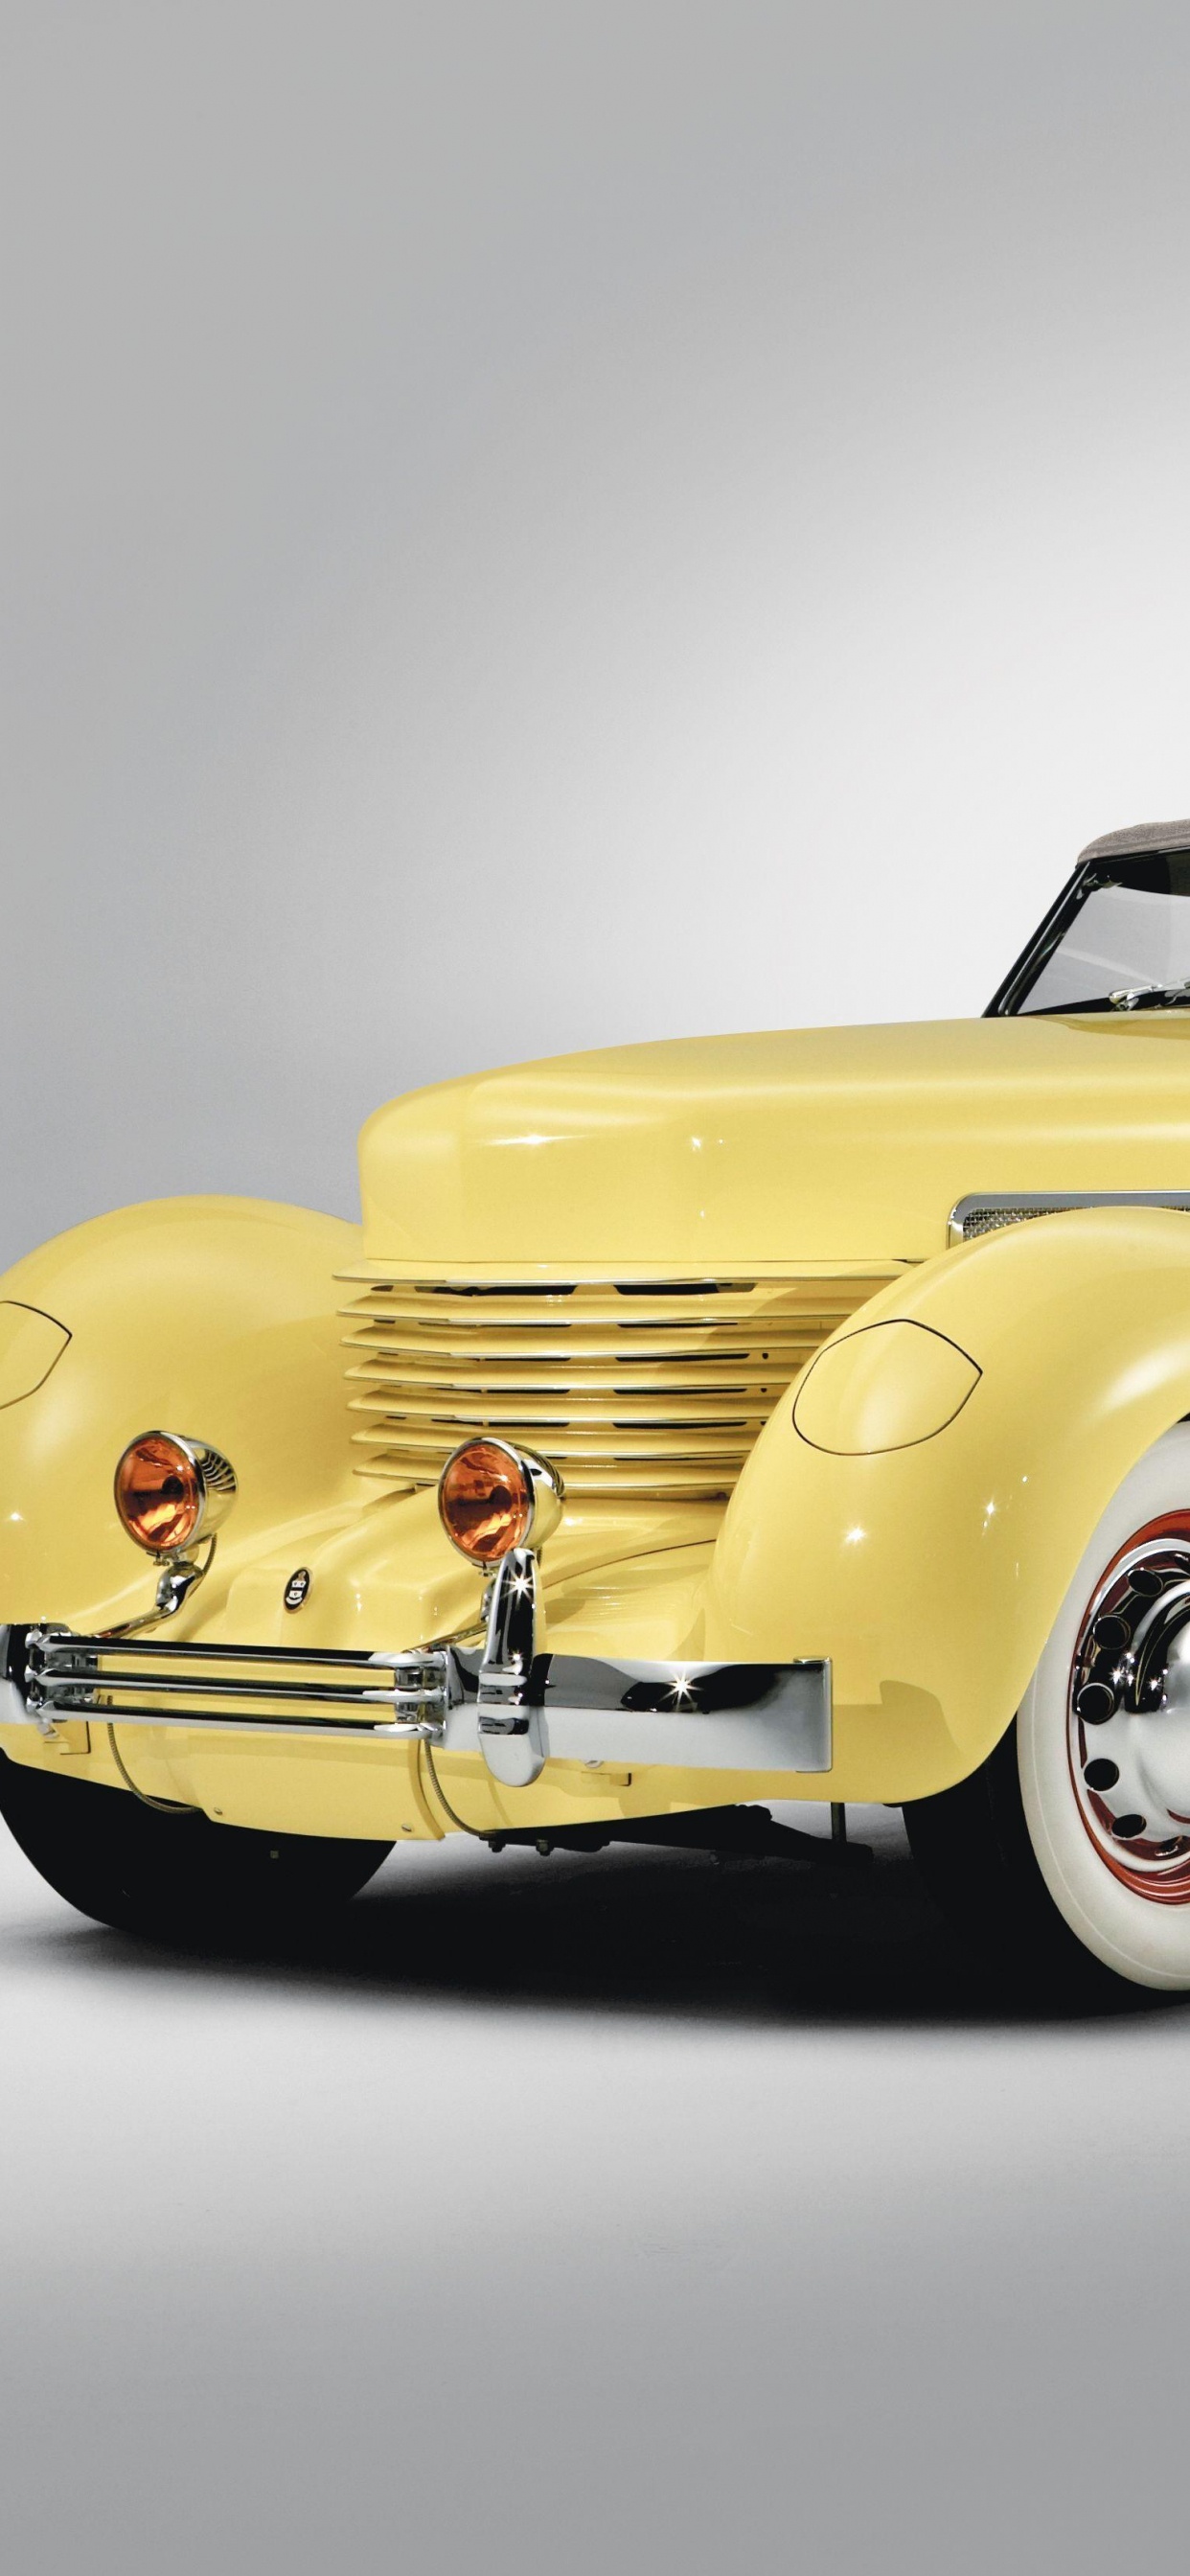 Yellow Vintage Car on White Background. Wallpaper in 1242x2688 Resolution